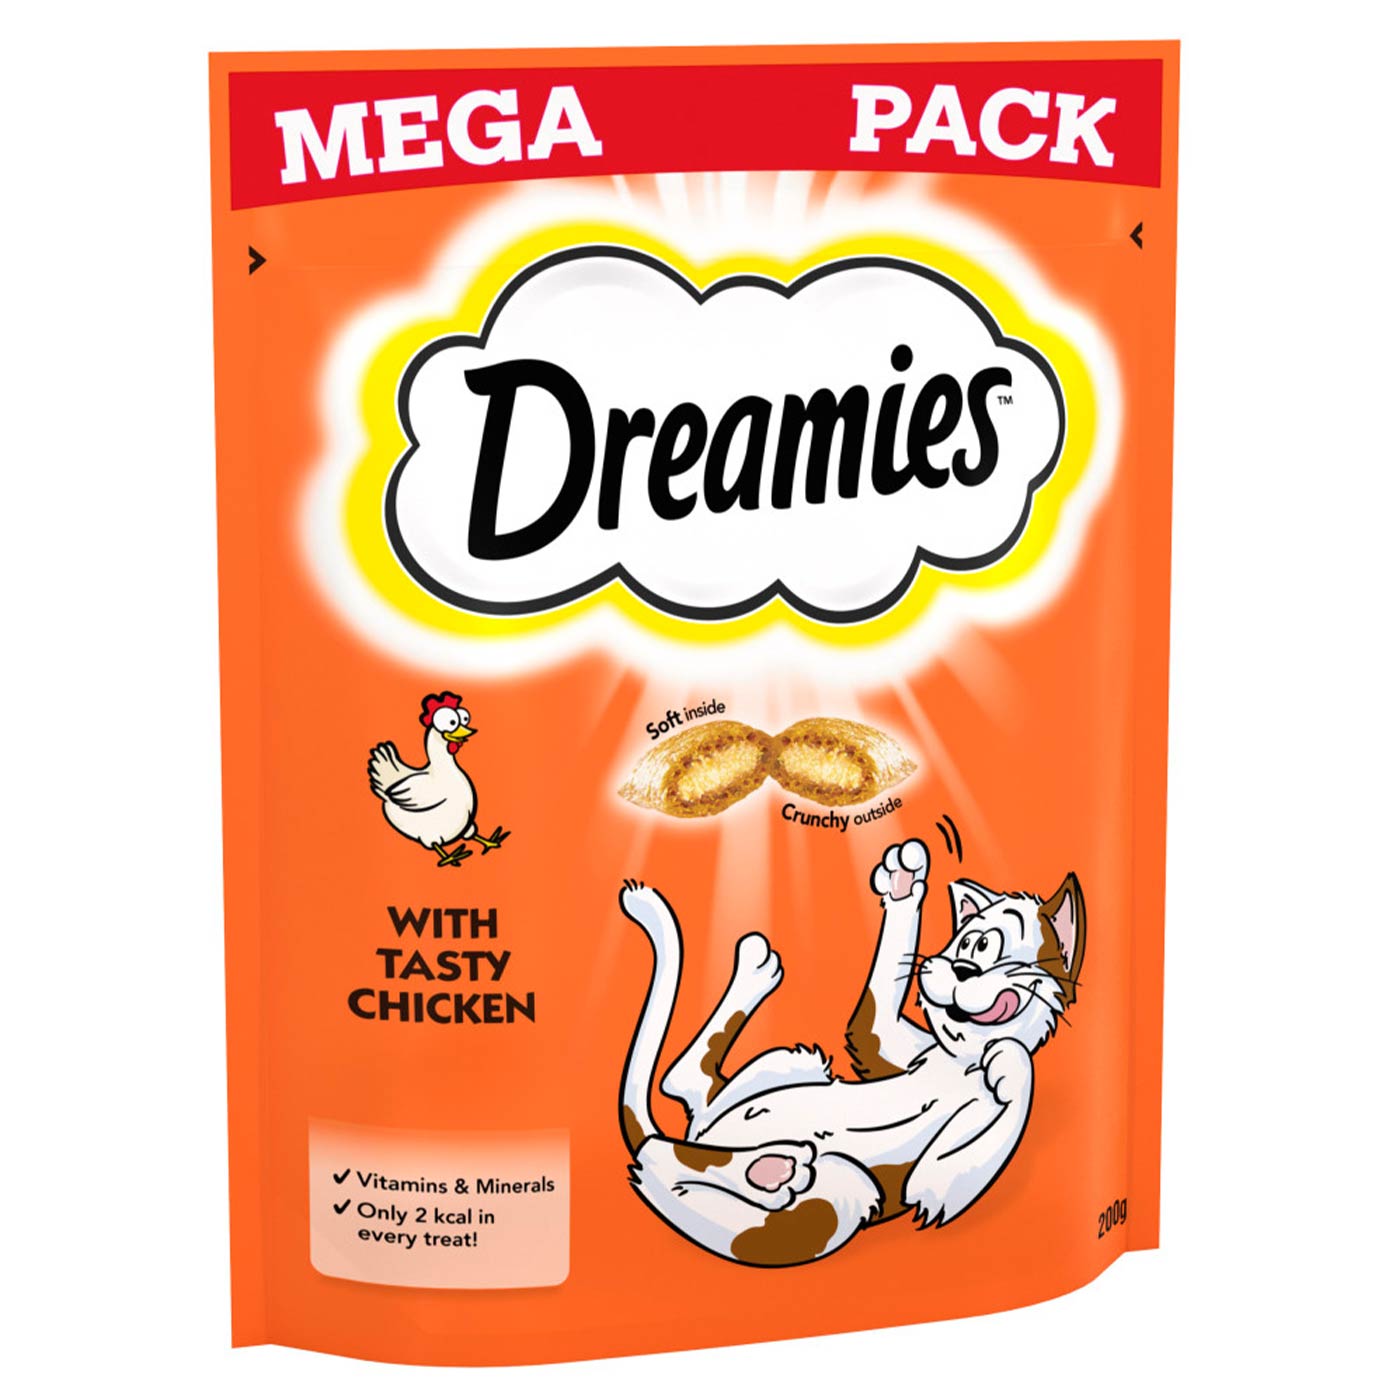 Dreamies Cat Treats with Chicken